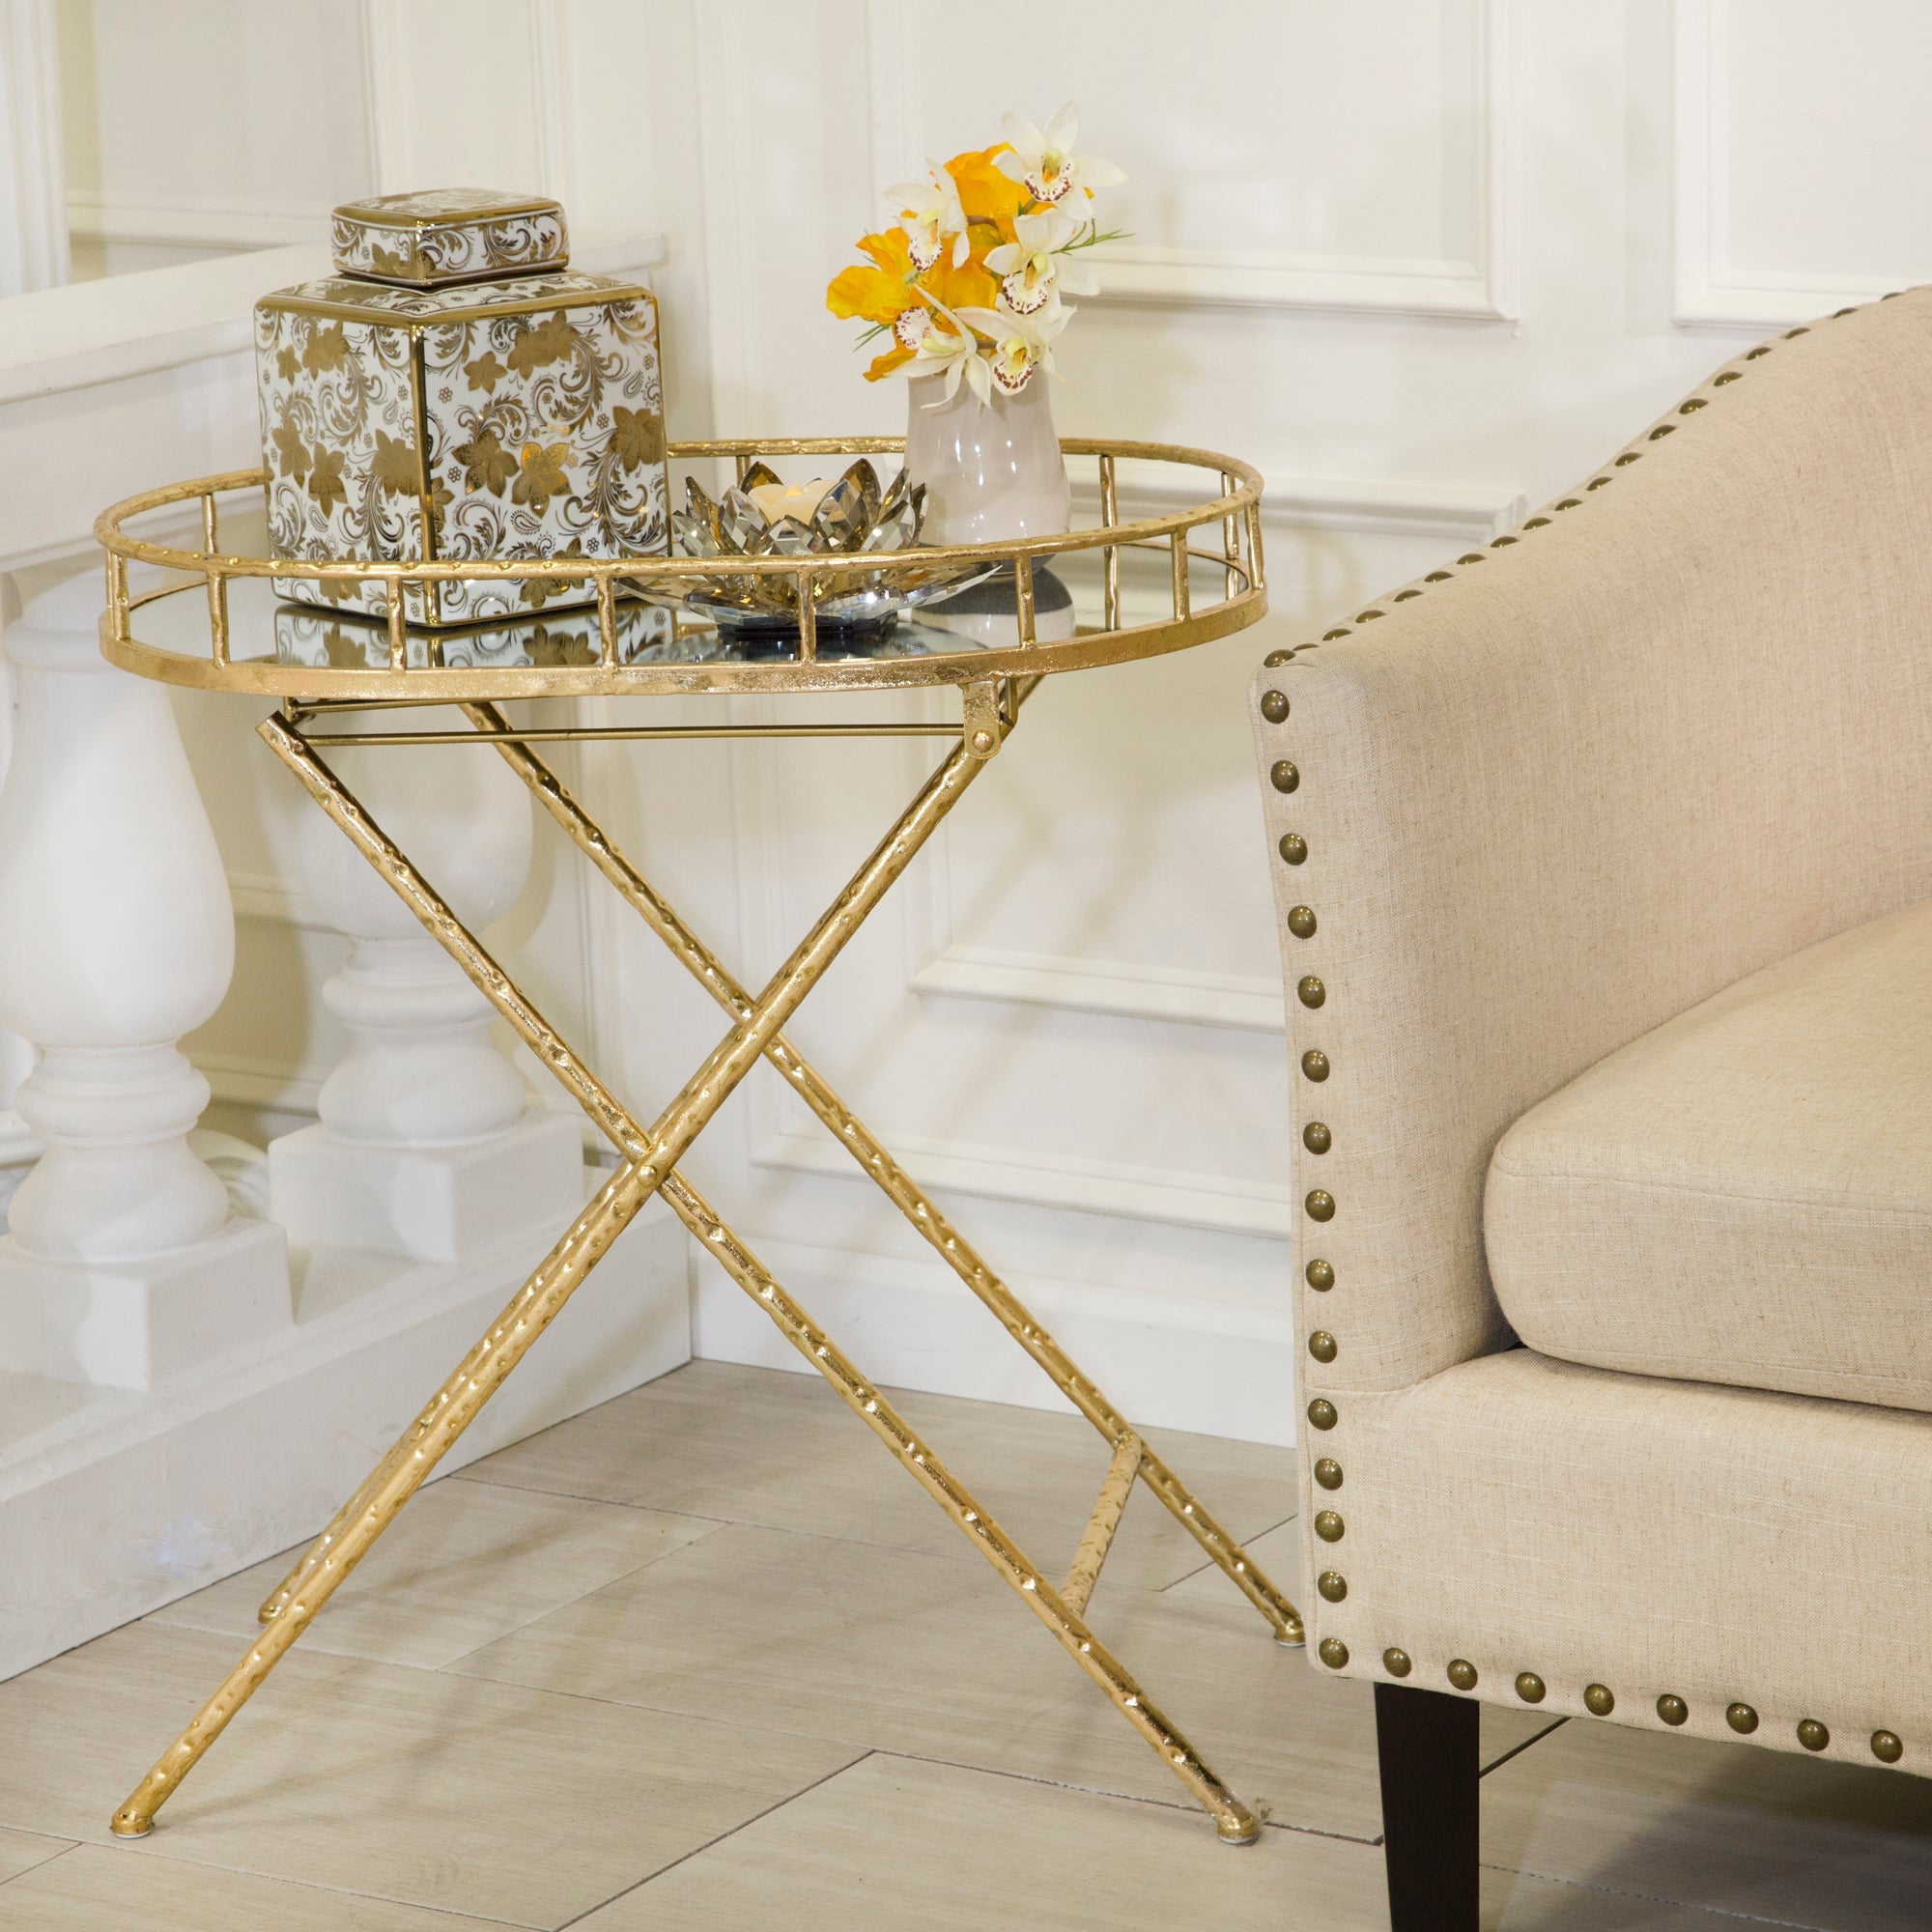 Sabebrook Home Oval Gold Metal Accent Table, Mirror Top - The Bar Design